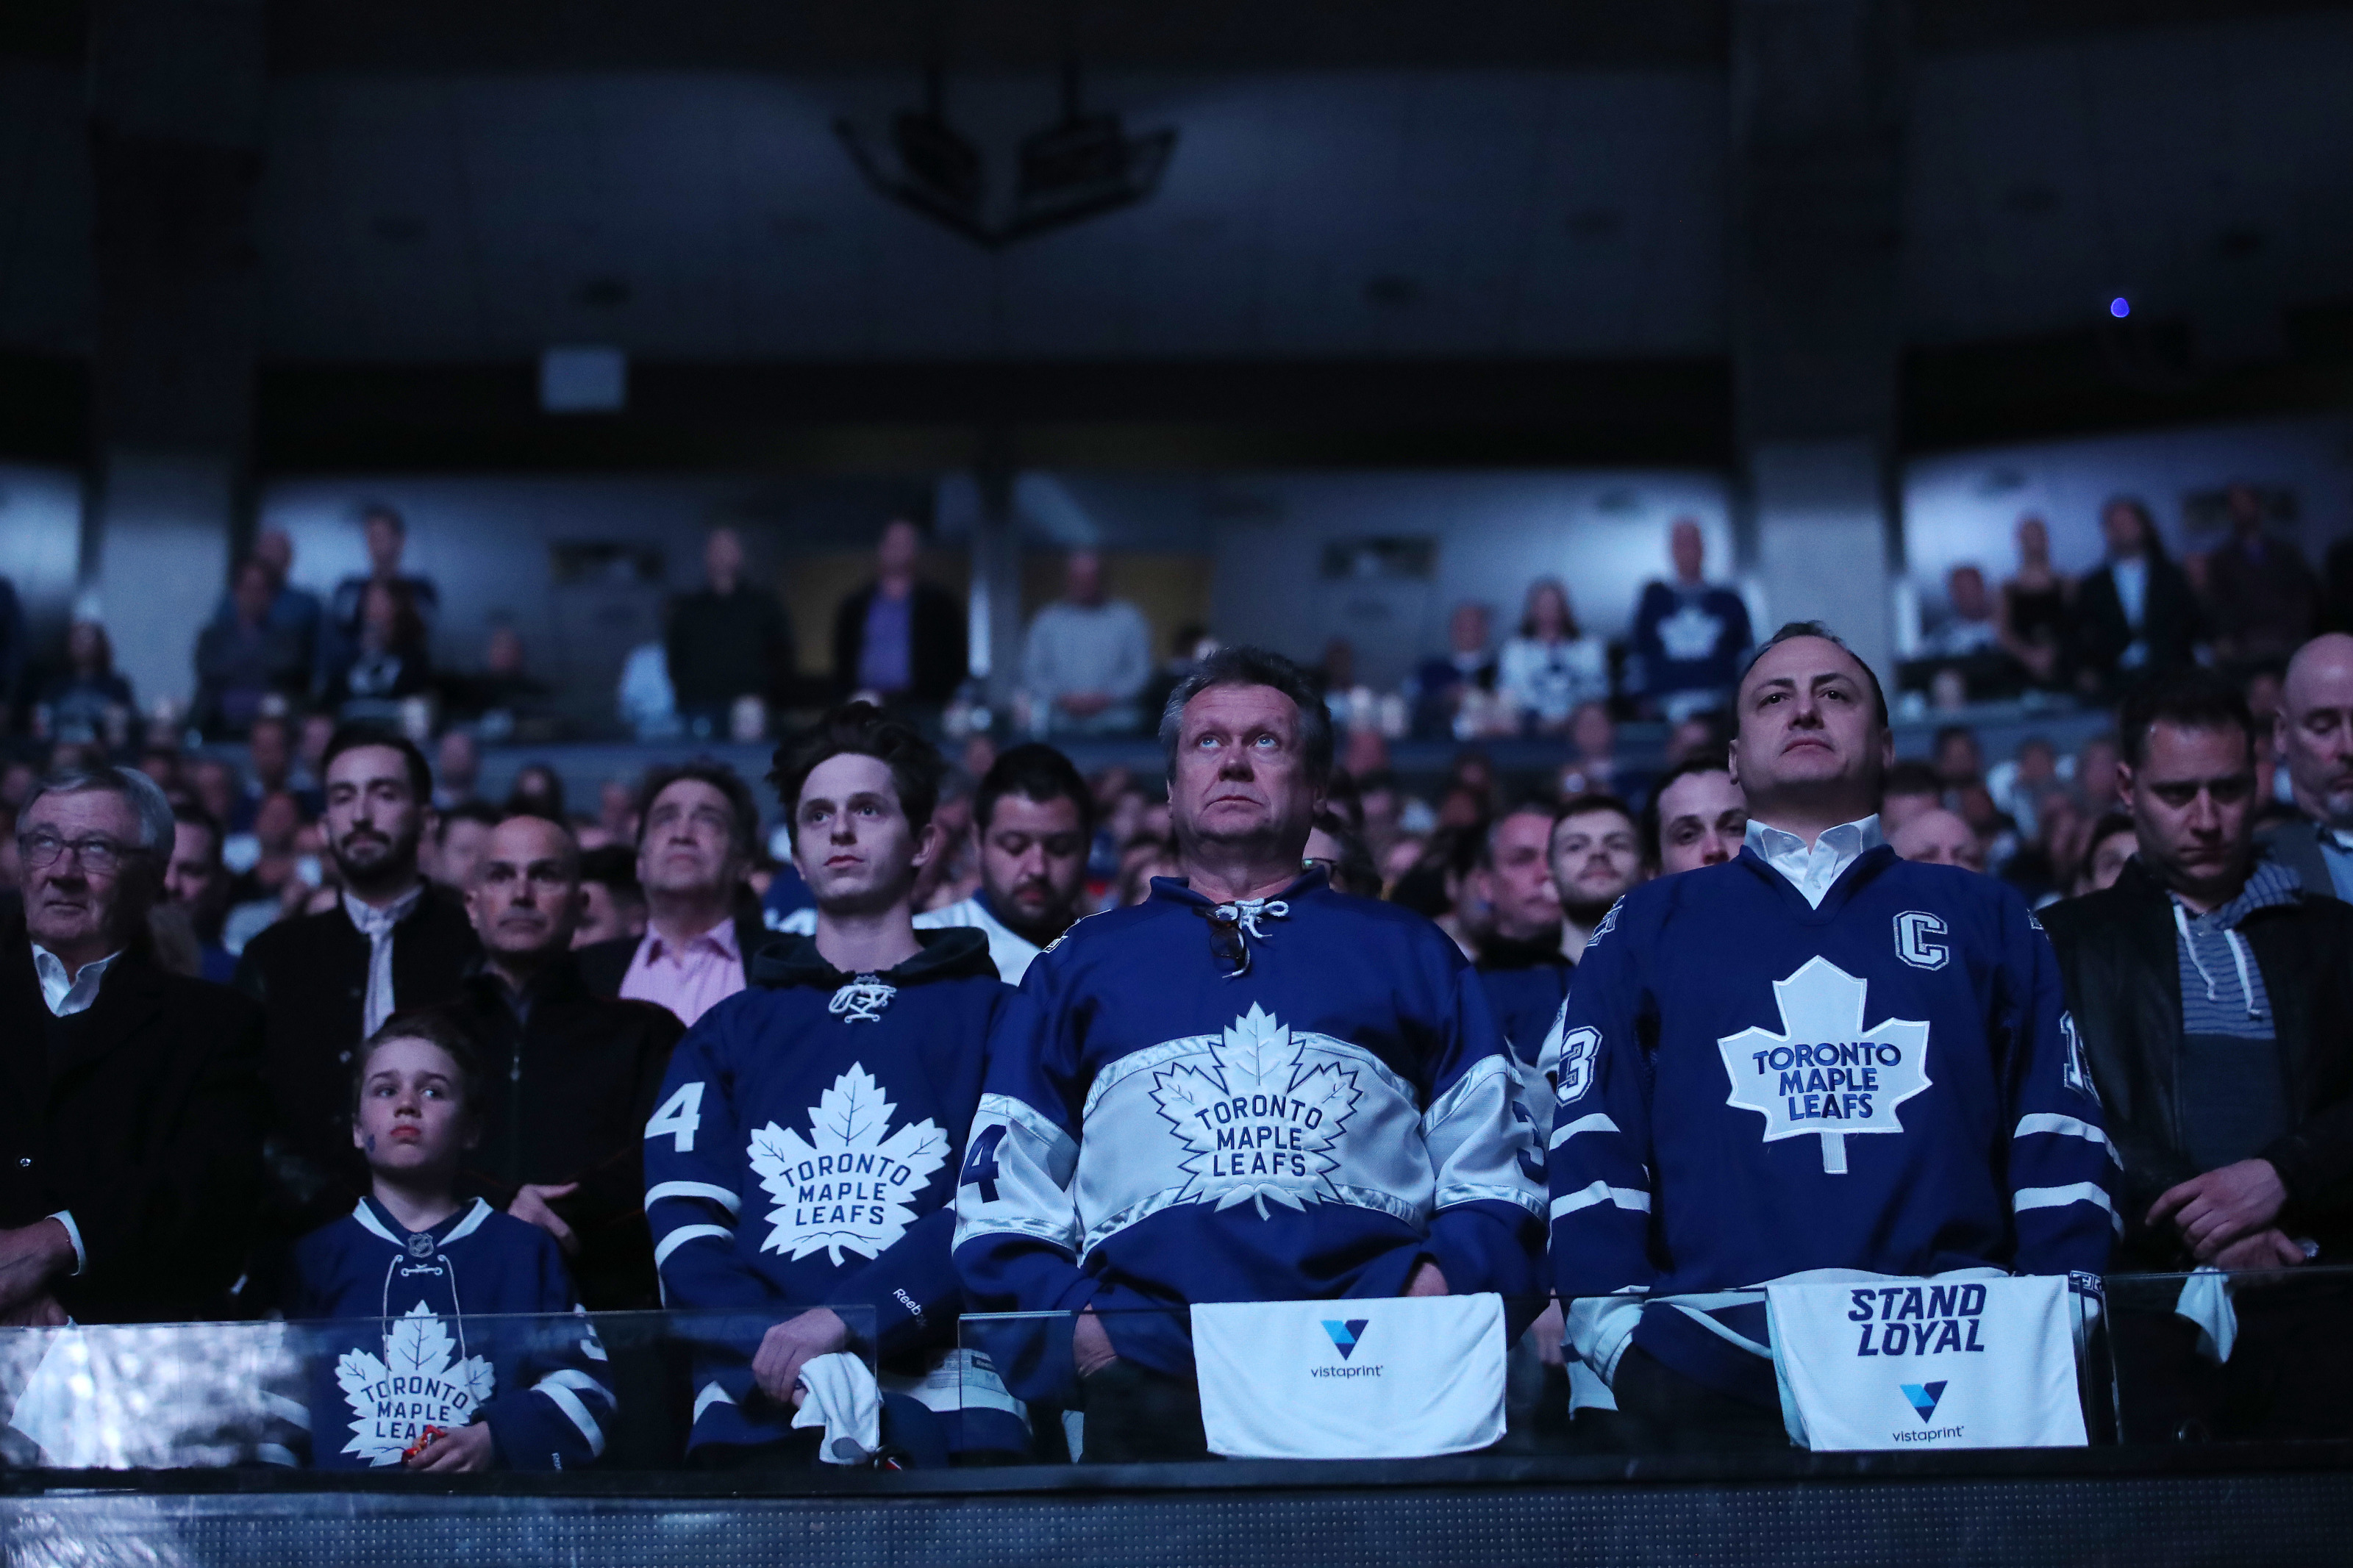 From the Netherlands to Toronto to Watch the Maple Leafs #2